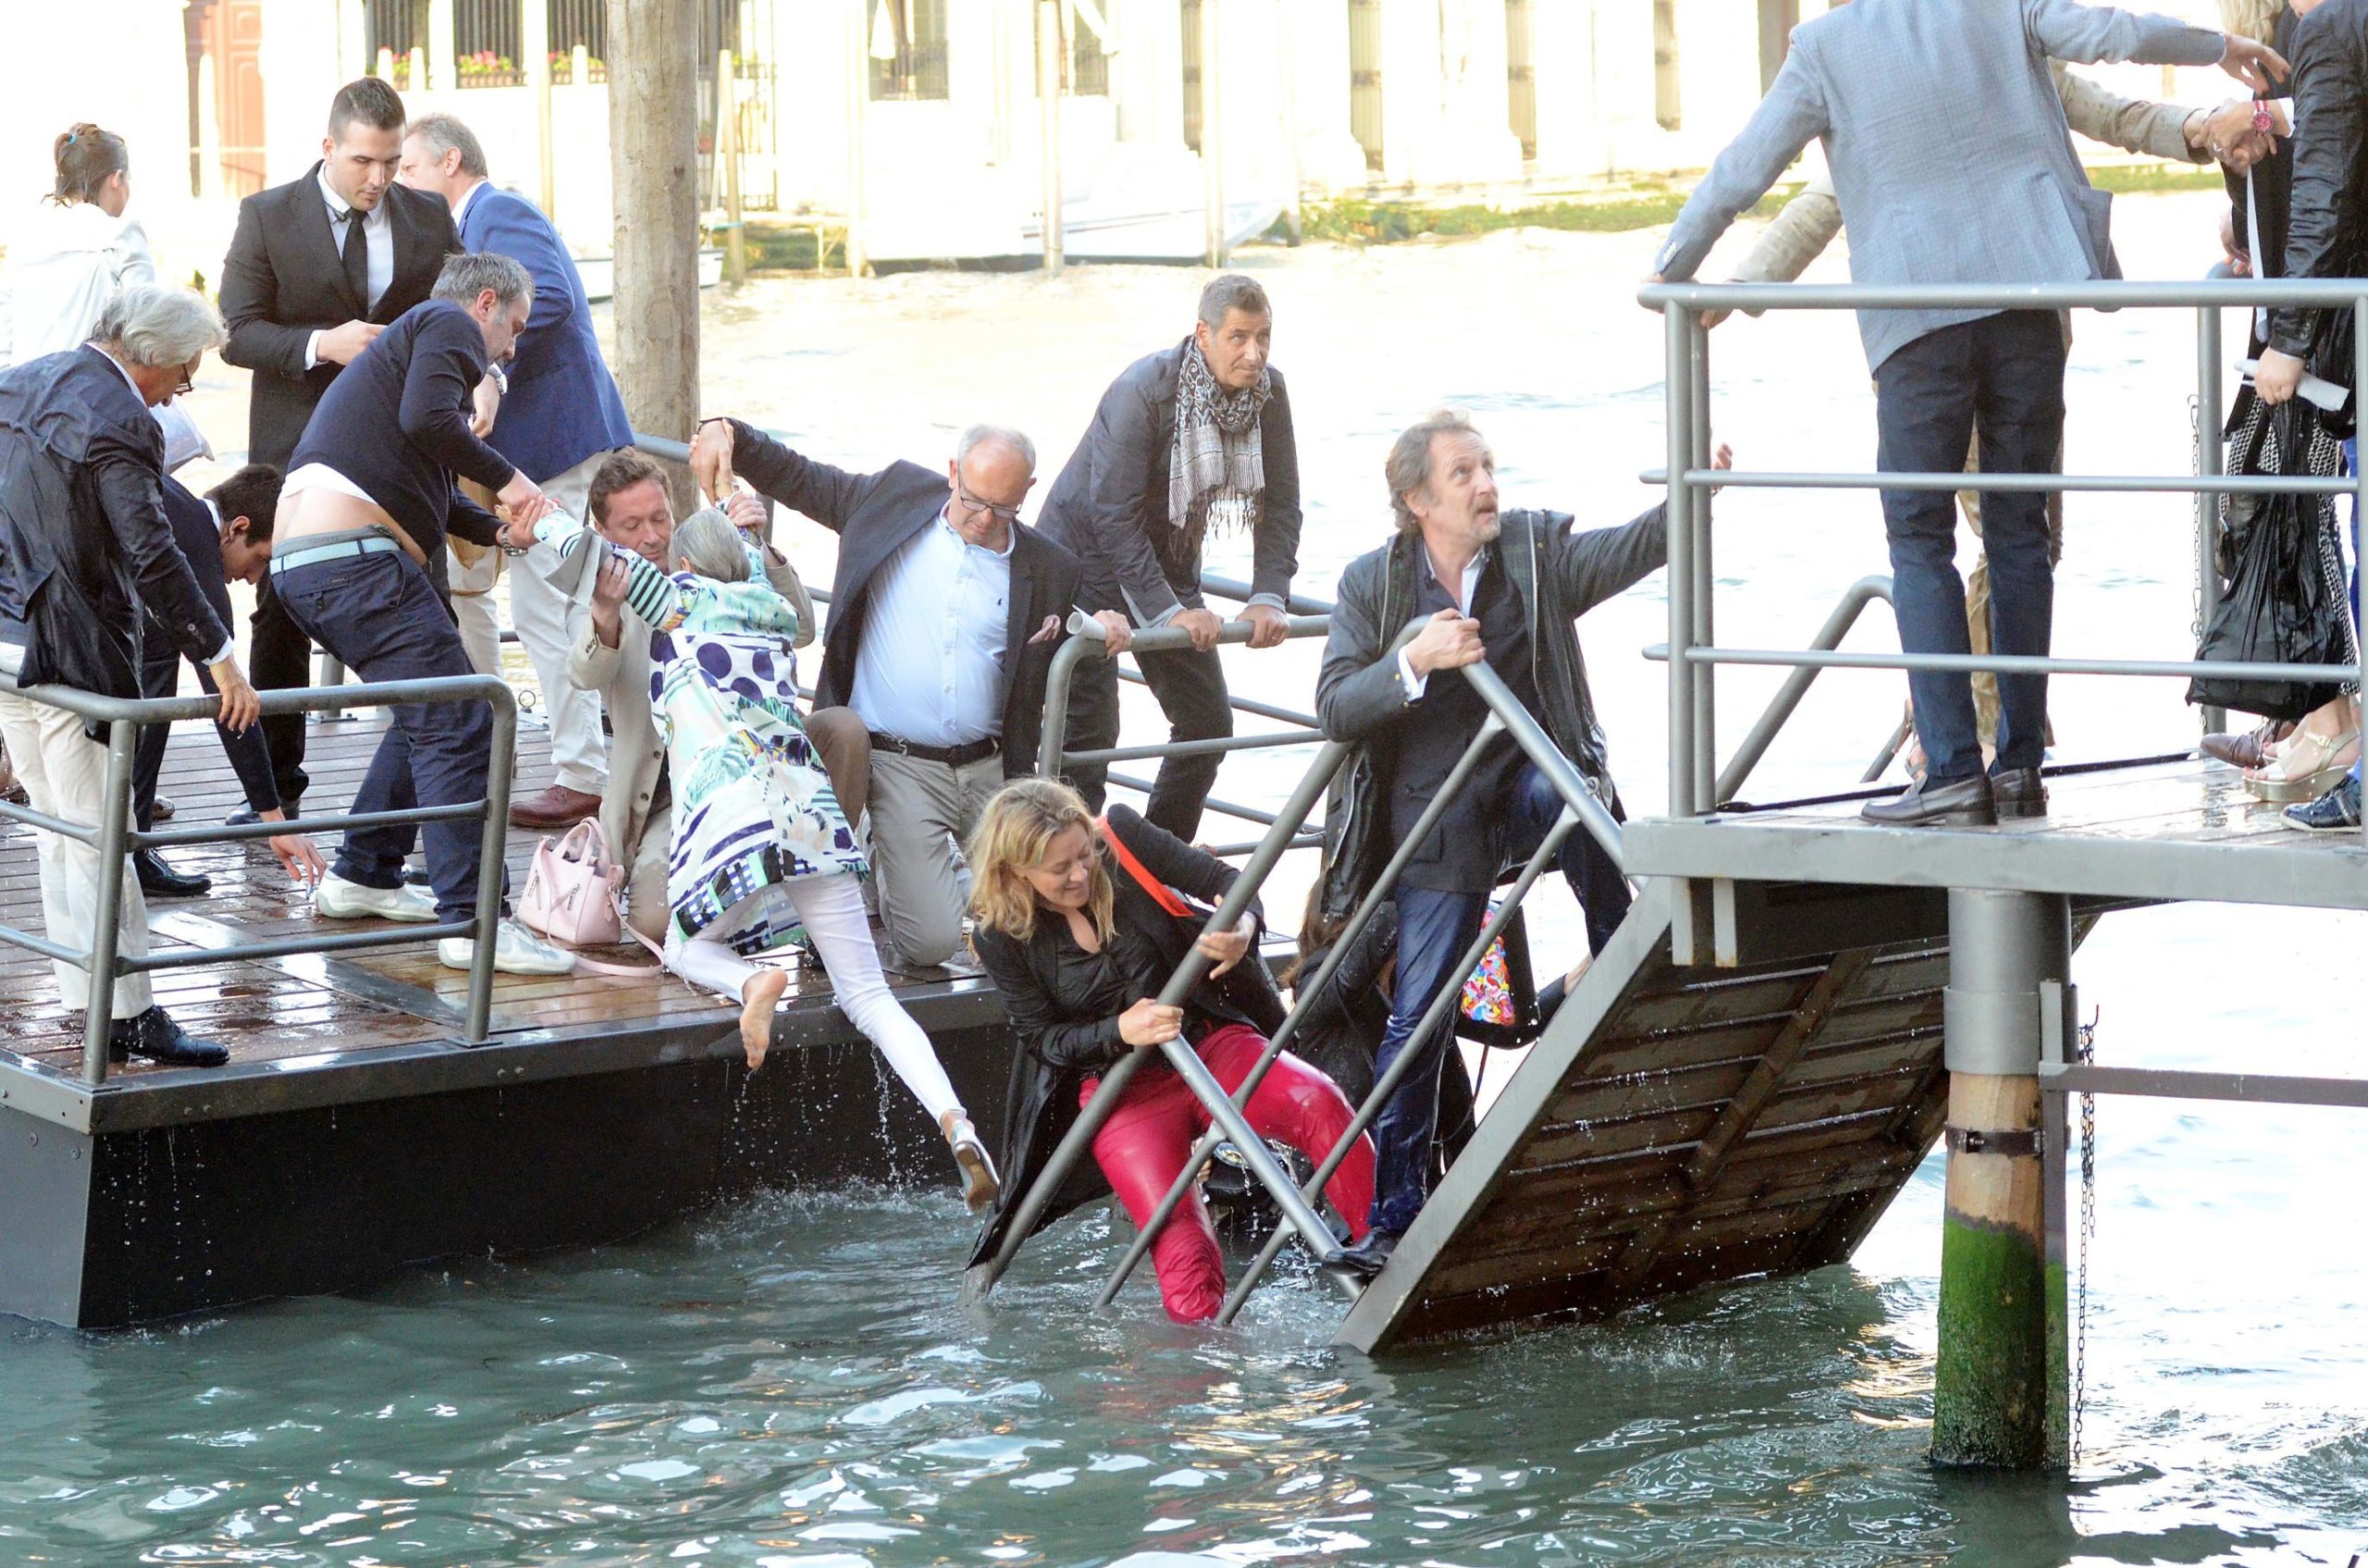 Visitors to the Venice Biennale fall into the canal, 2015 Â© Backgrid